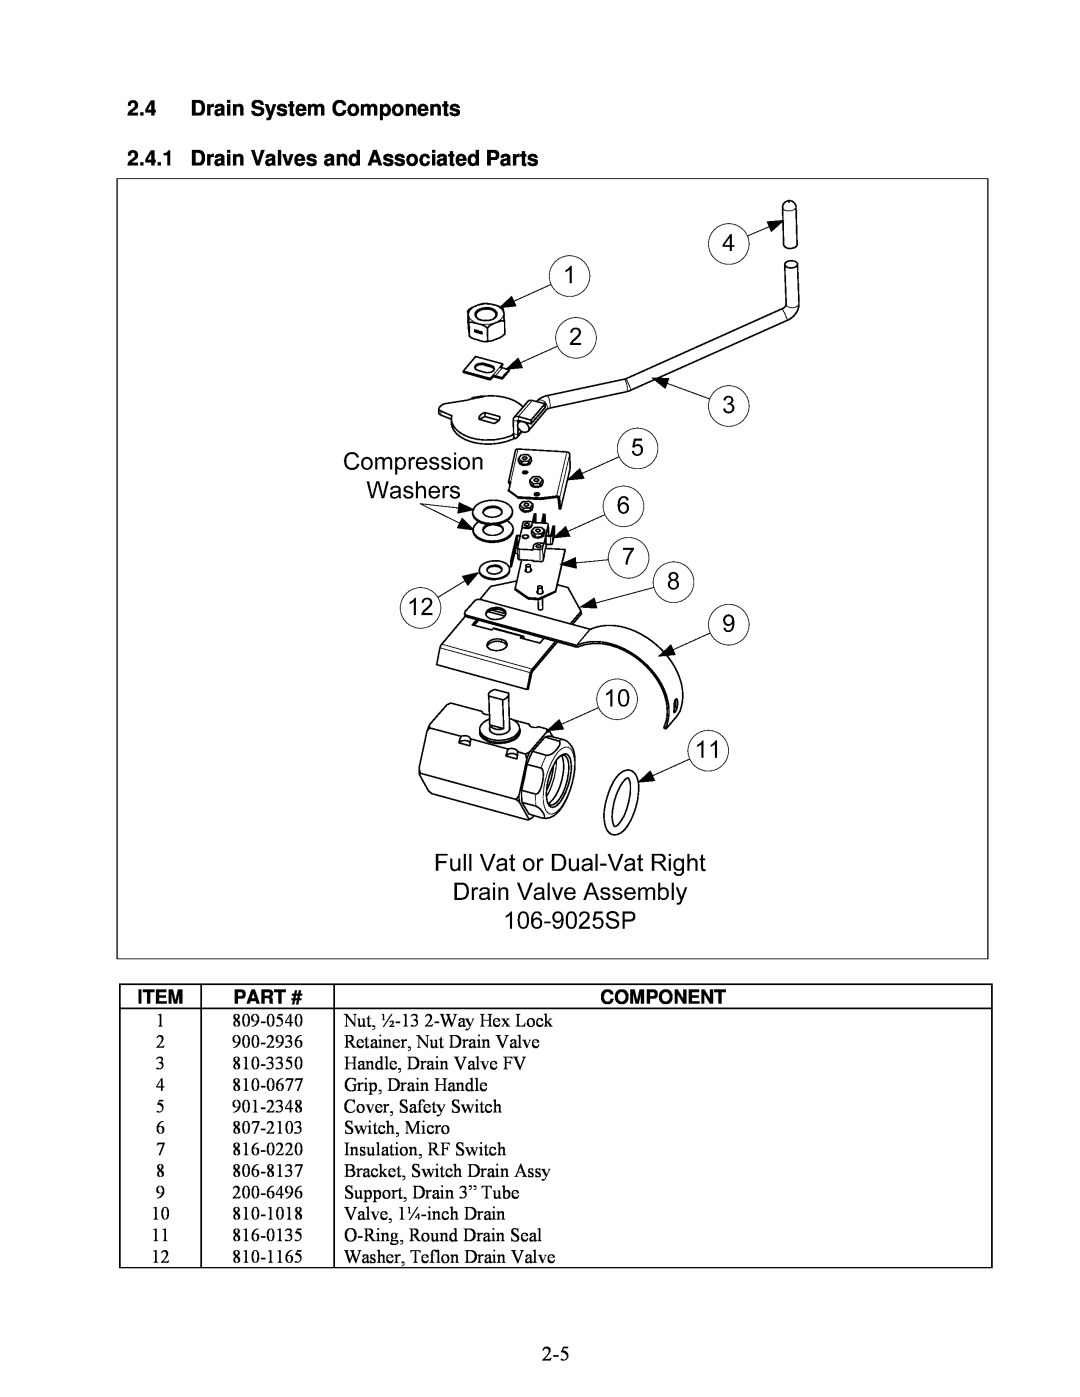 Frymaster 8196345 manual 2.4Drain System Components, Drain Valves and Associated Parts 